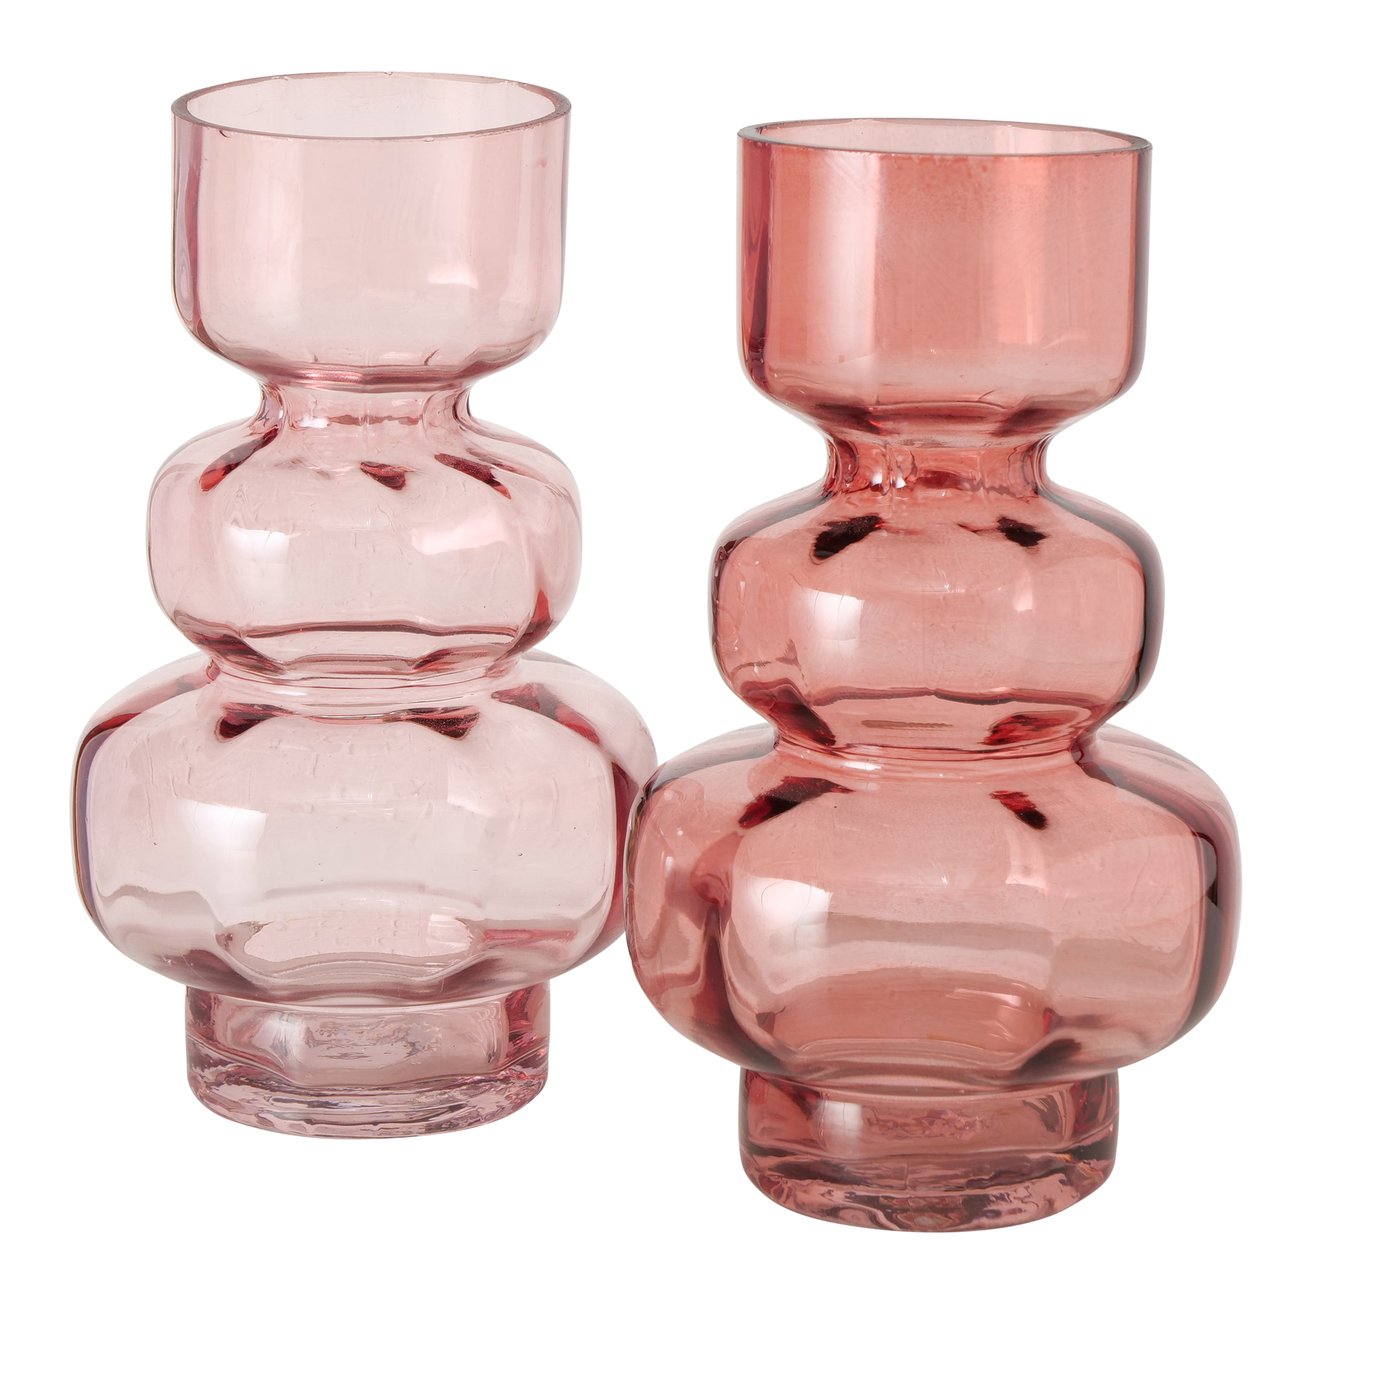 &Quirky Gianna Glass Bubble Vase : Dark Rose or Light Rose